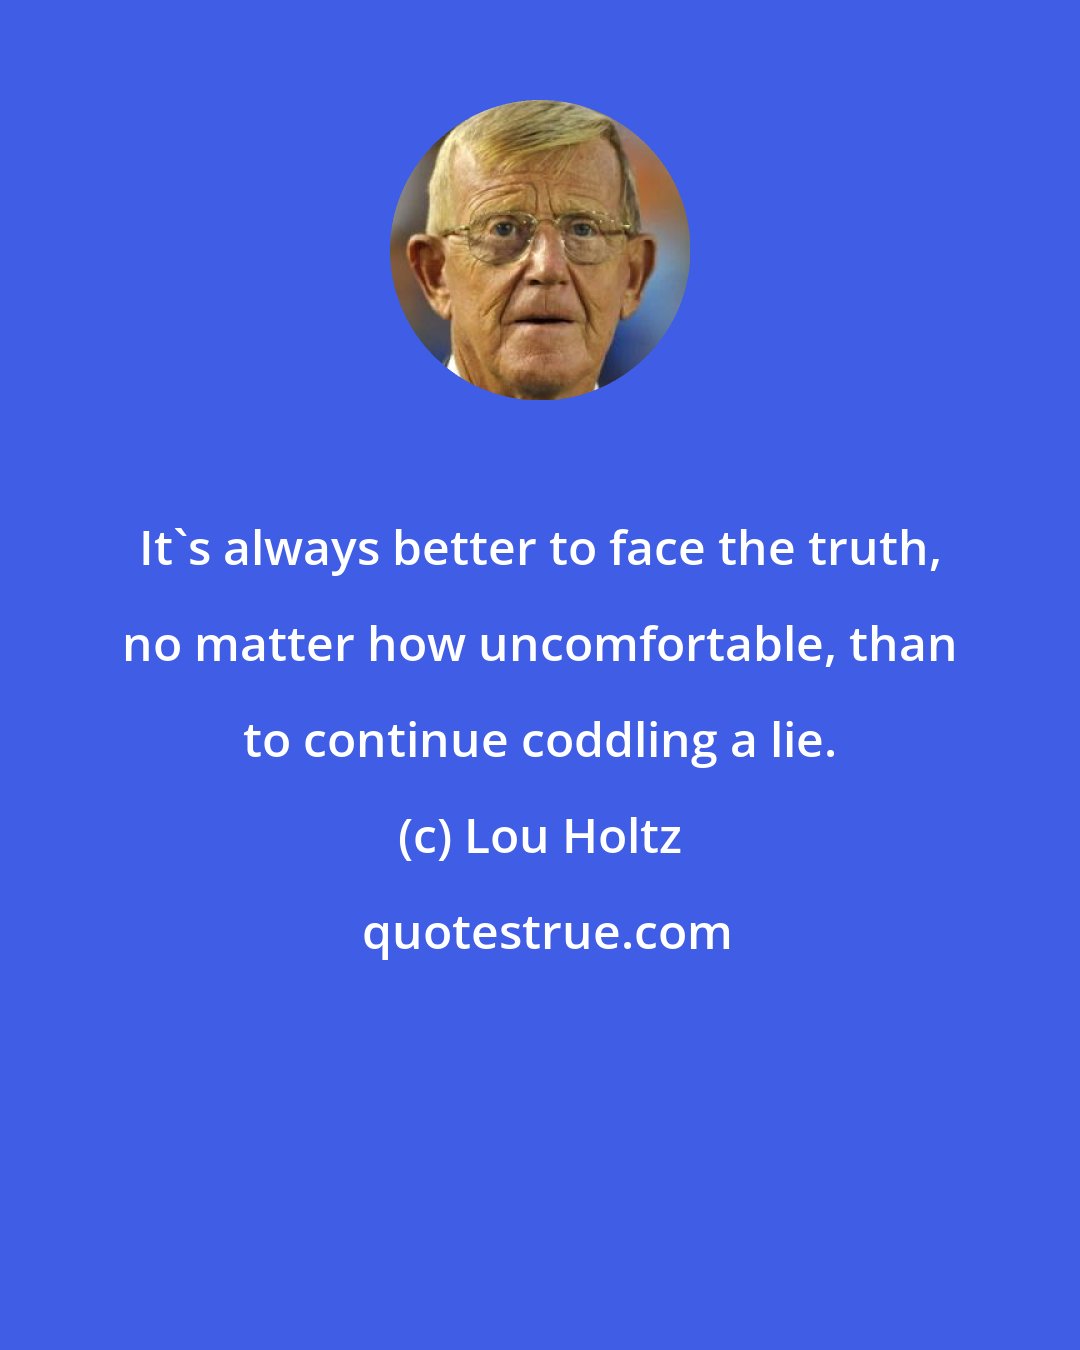 Lou Holtz: It's always better to face the truth, no matter how uncomfortable, than to continue coddling a lie.